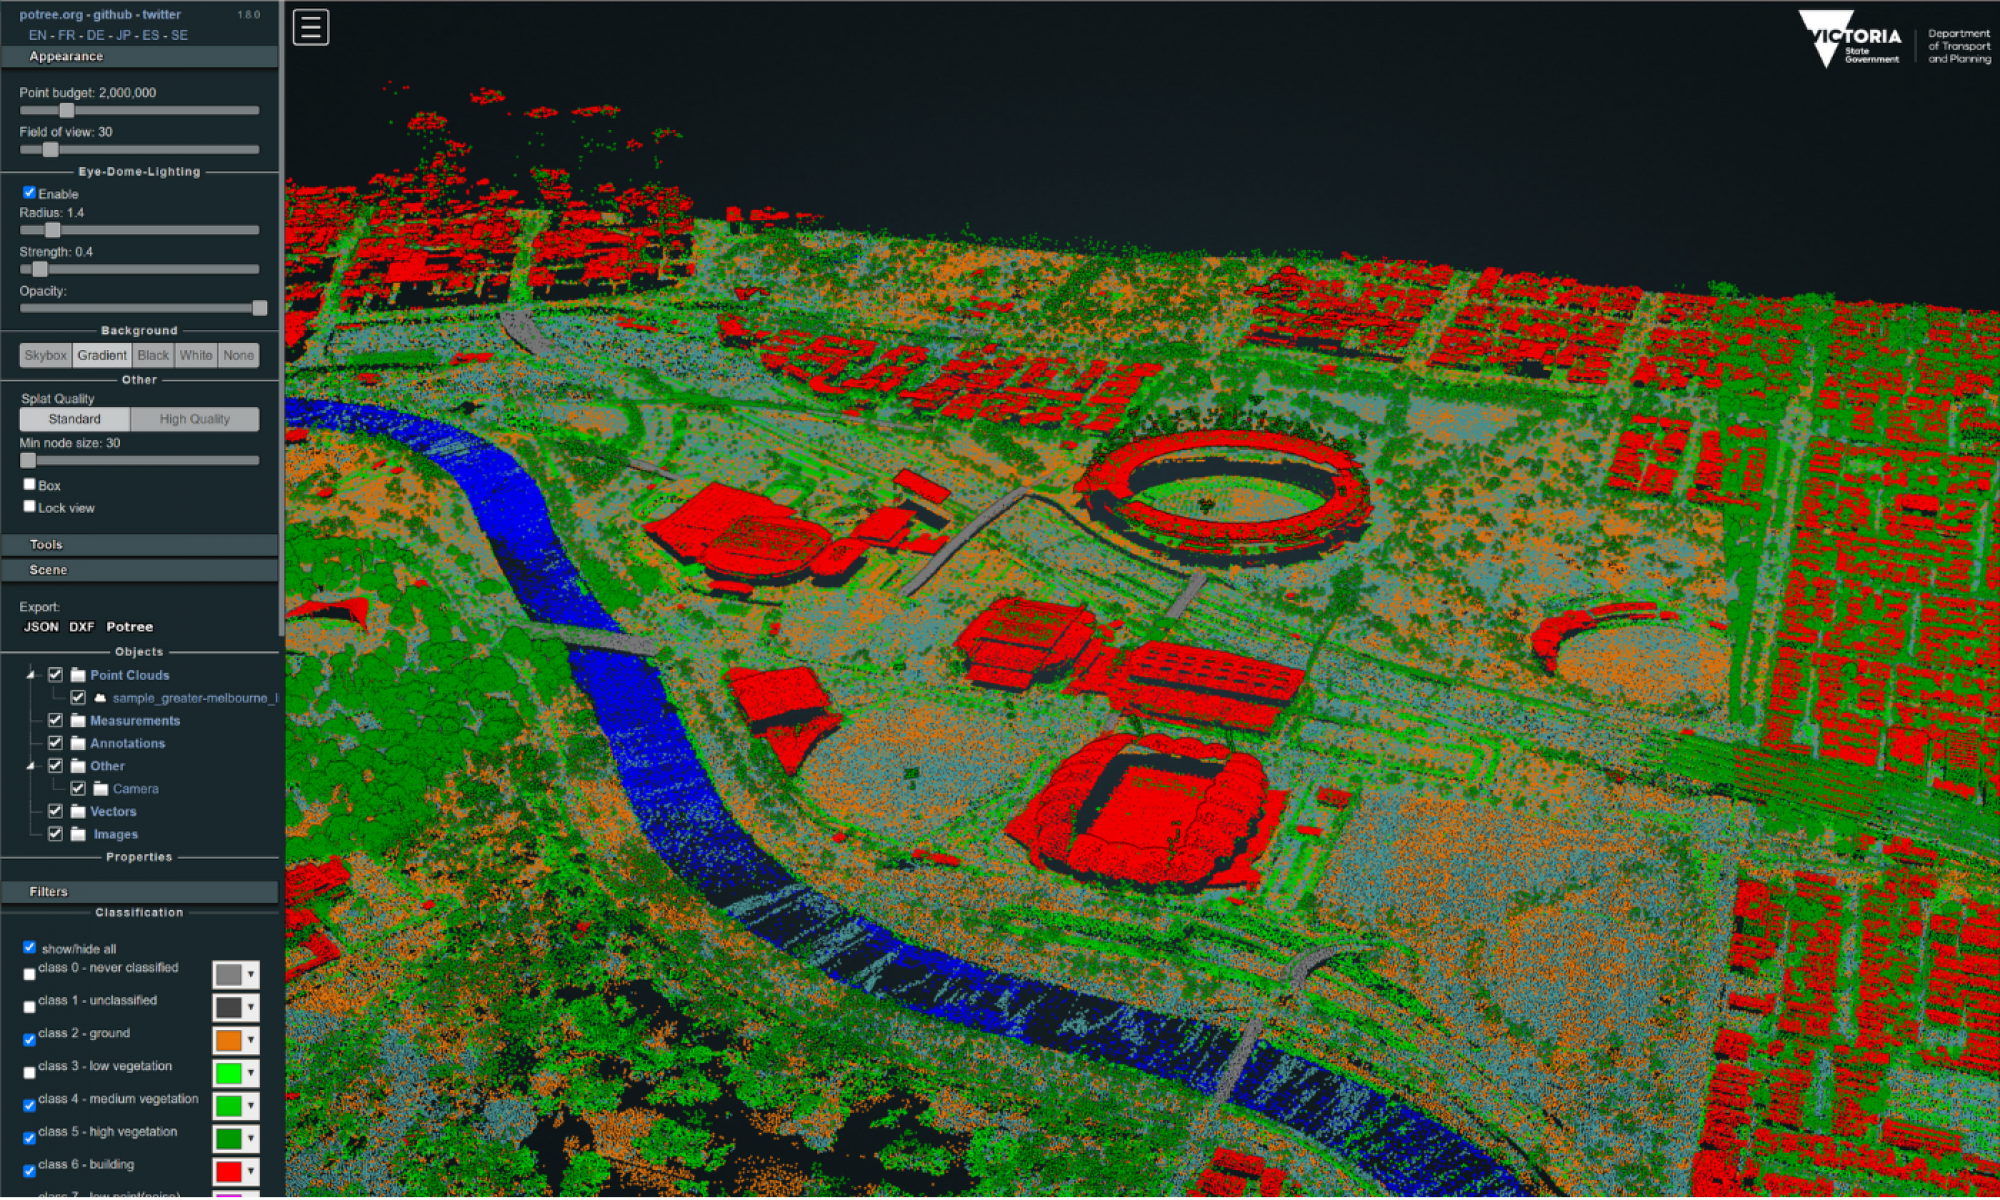 A screen capture of the web browser preview of greater Melbourne LiDAR data. A menu on the left hand side shows options to customise the data. The main screen shows terrain in shades of orange, vegetation in green, water in blue and buildings in red.